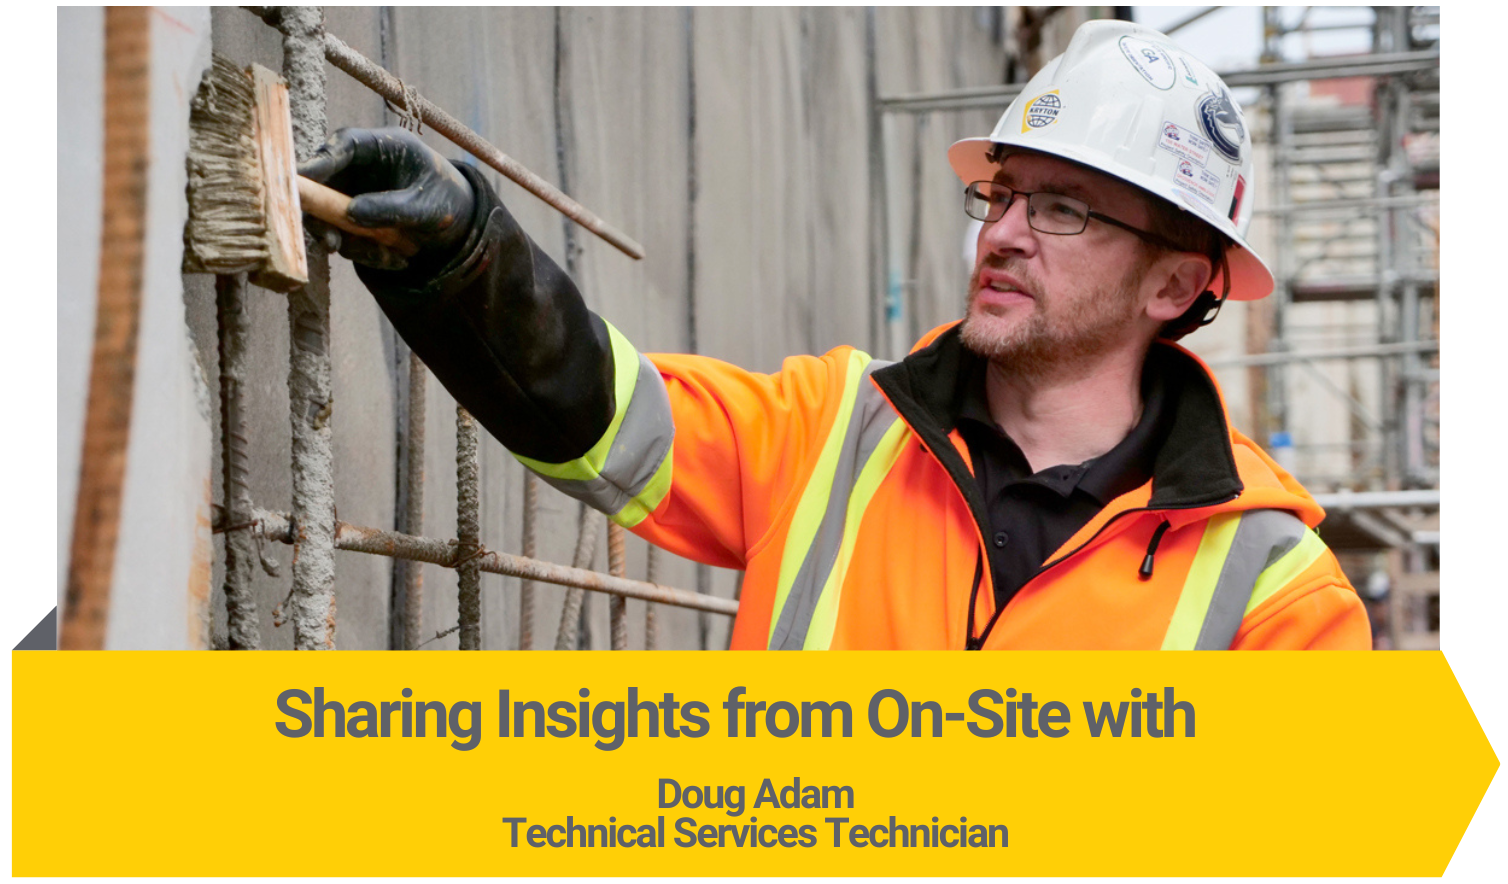 Sharing Insights from On-Site with Doug Adam, Technical Services Technician